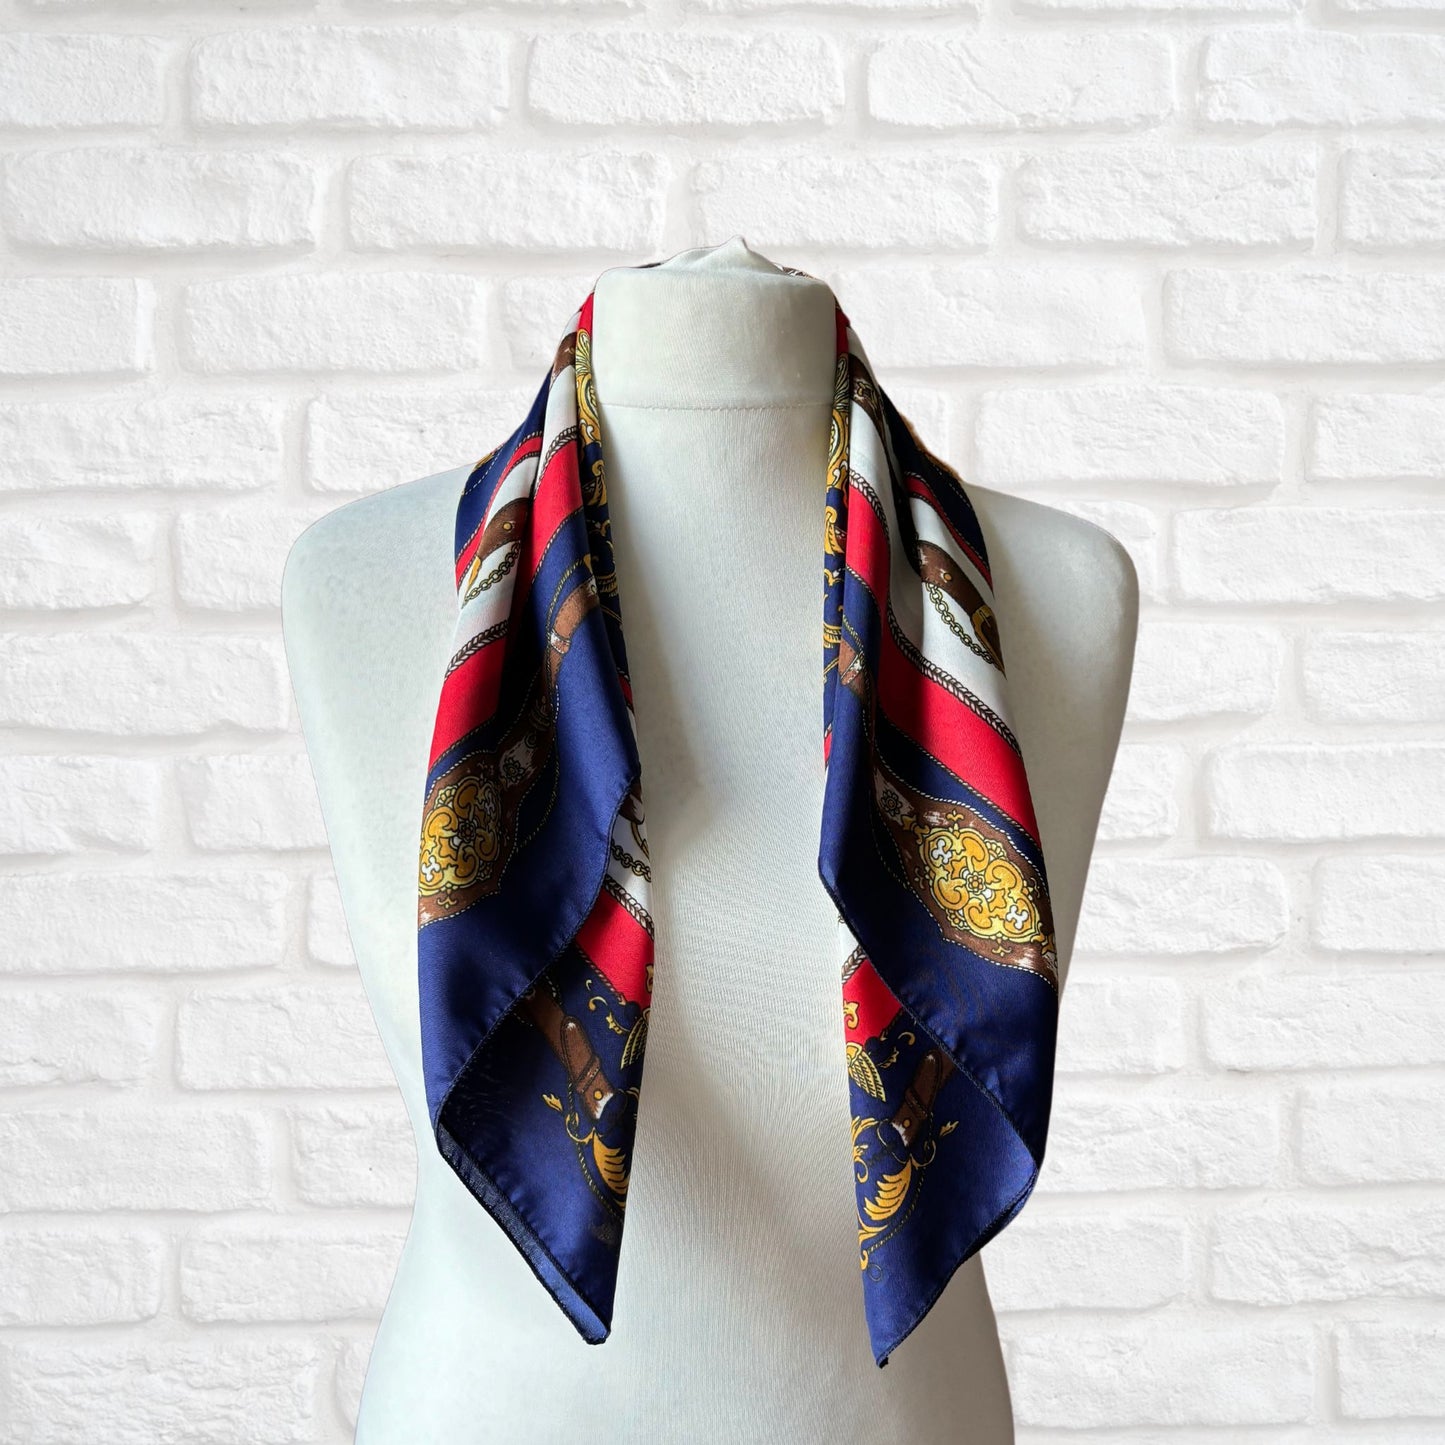 Elegant Navy Blue, Red, White, Brown and Gold Equestrian Style Square Vintage Scarf. Great Gift idea